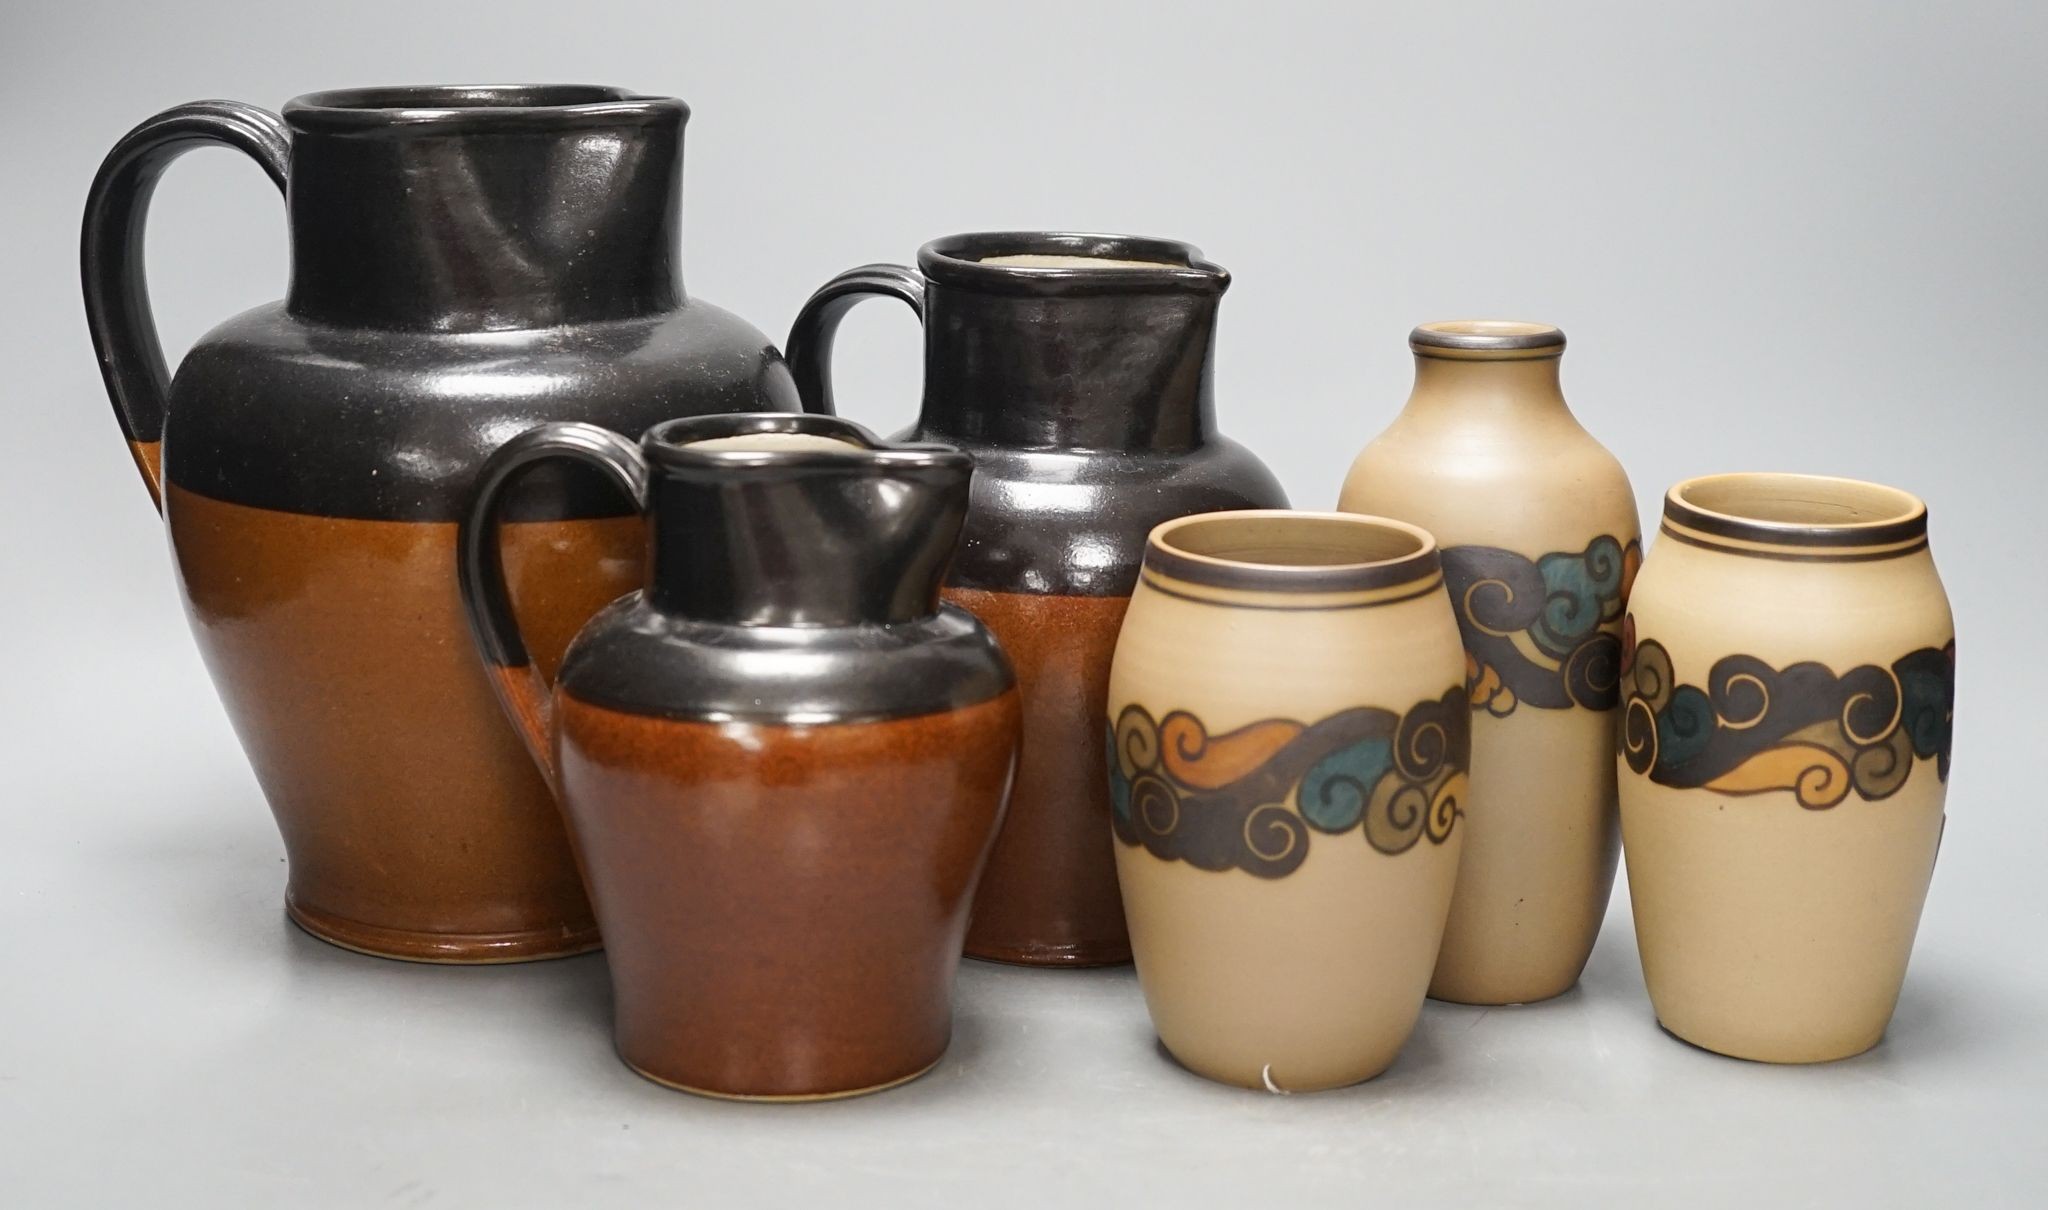 A graduated set of three Bourne Denby stoneware jugs and three 1930's stoneware vases, by Bornholm, Denmark (6)